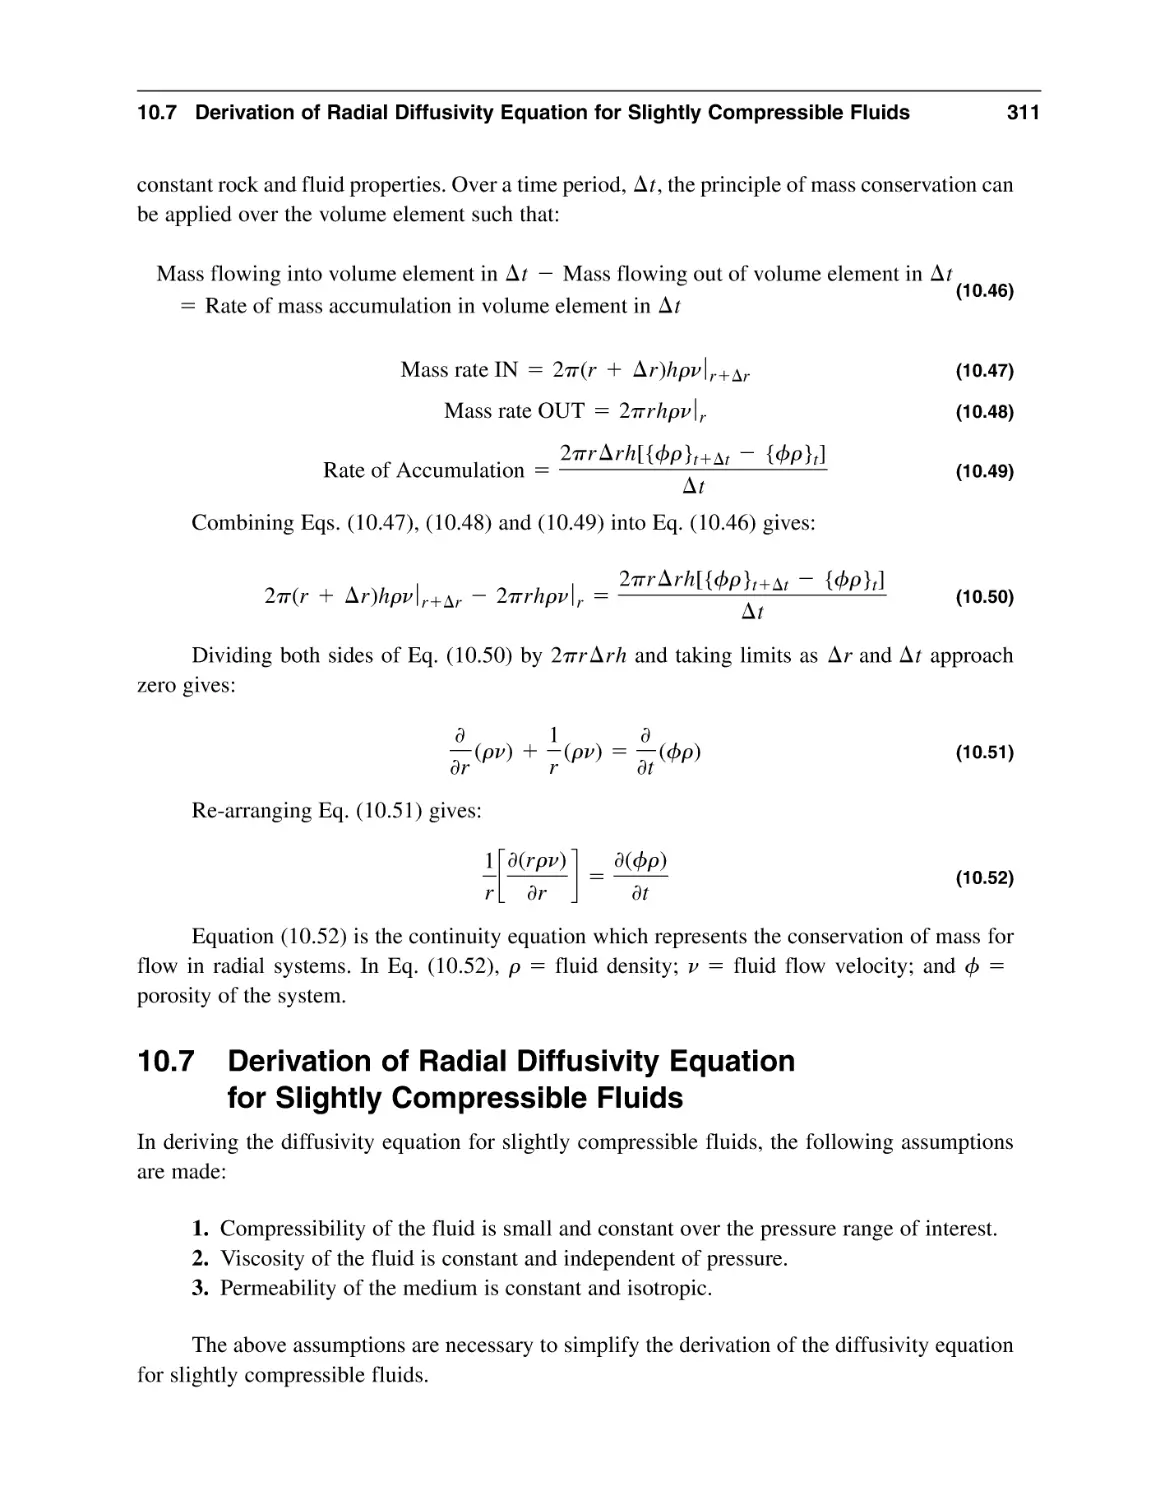 10.7 Derivation of Radial Diffusivity Equation for Slightly Compressible Fluids